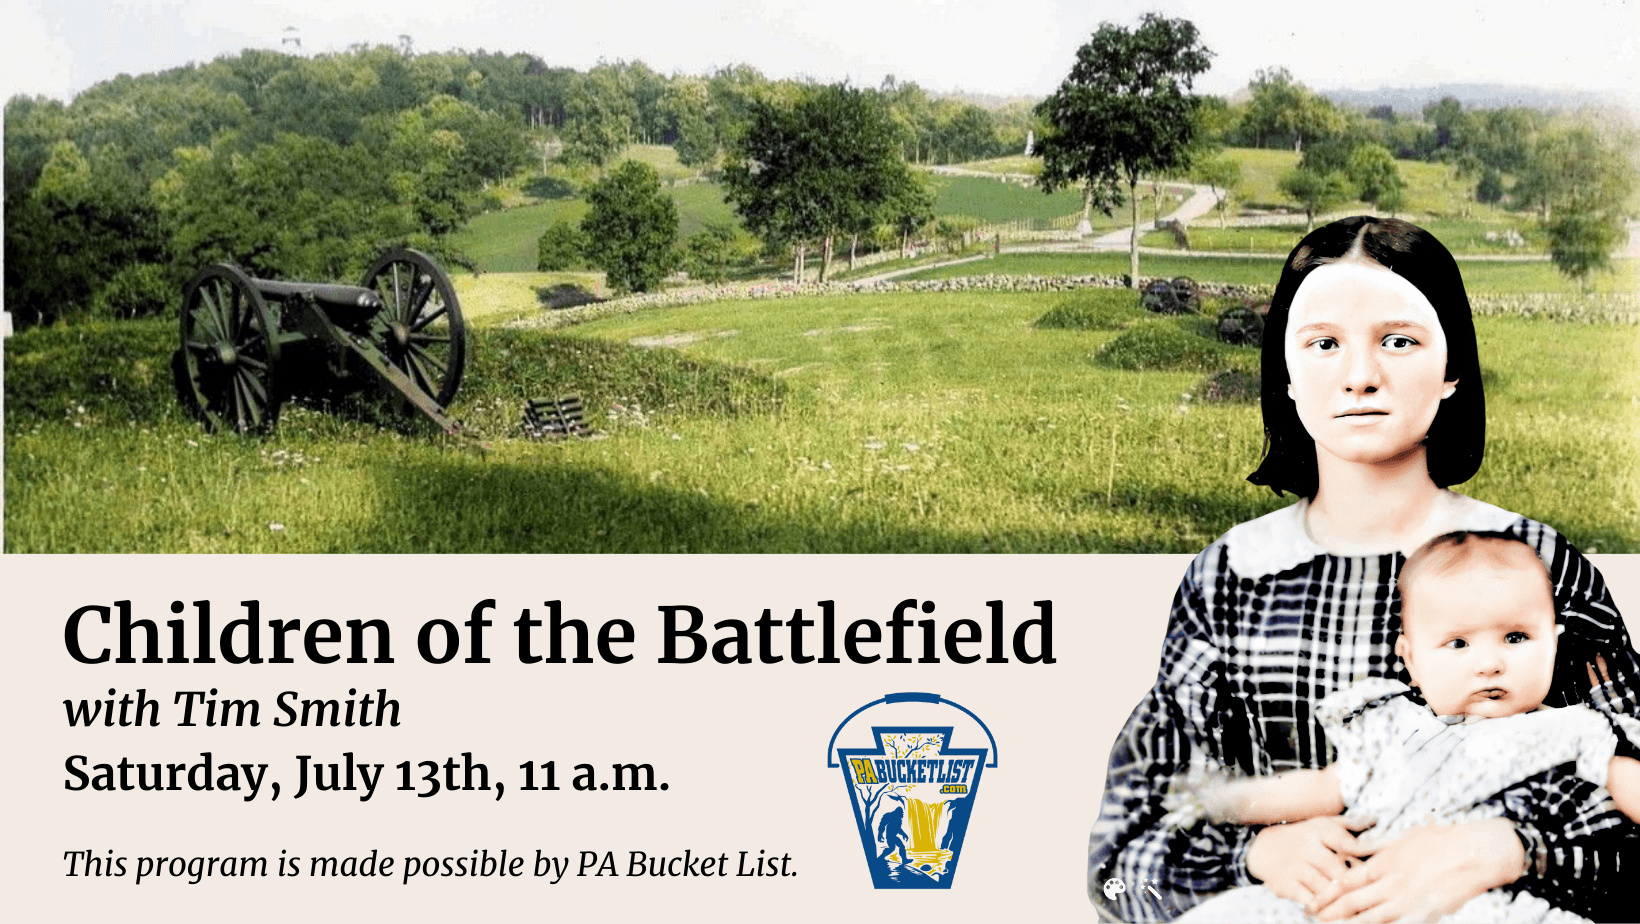 A historic battlefield scene with a cannon in a grassy field. Text: "Children of the Battlefield with Tim Smith, Saturday, July 13th, 11 a.m." Showing a teenage girl holding a baby.